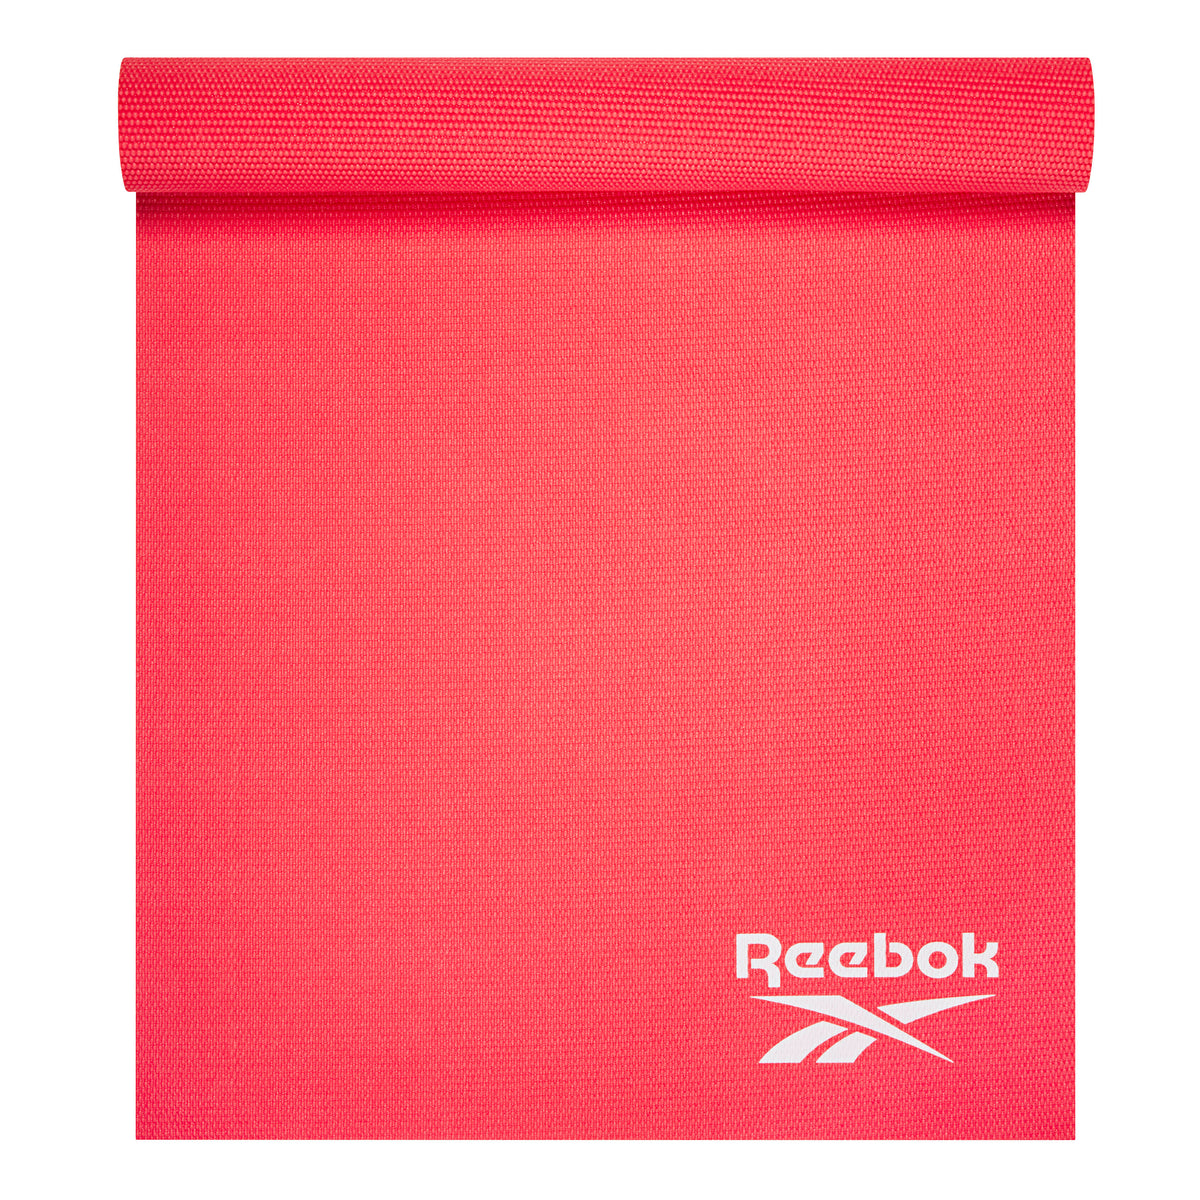 Reebok Solid Yoga Mat (5mm) Cherry top rolled